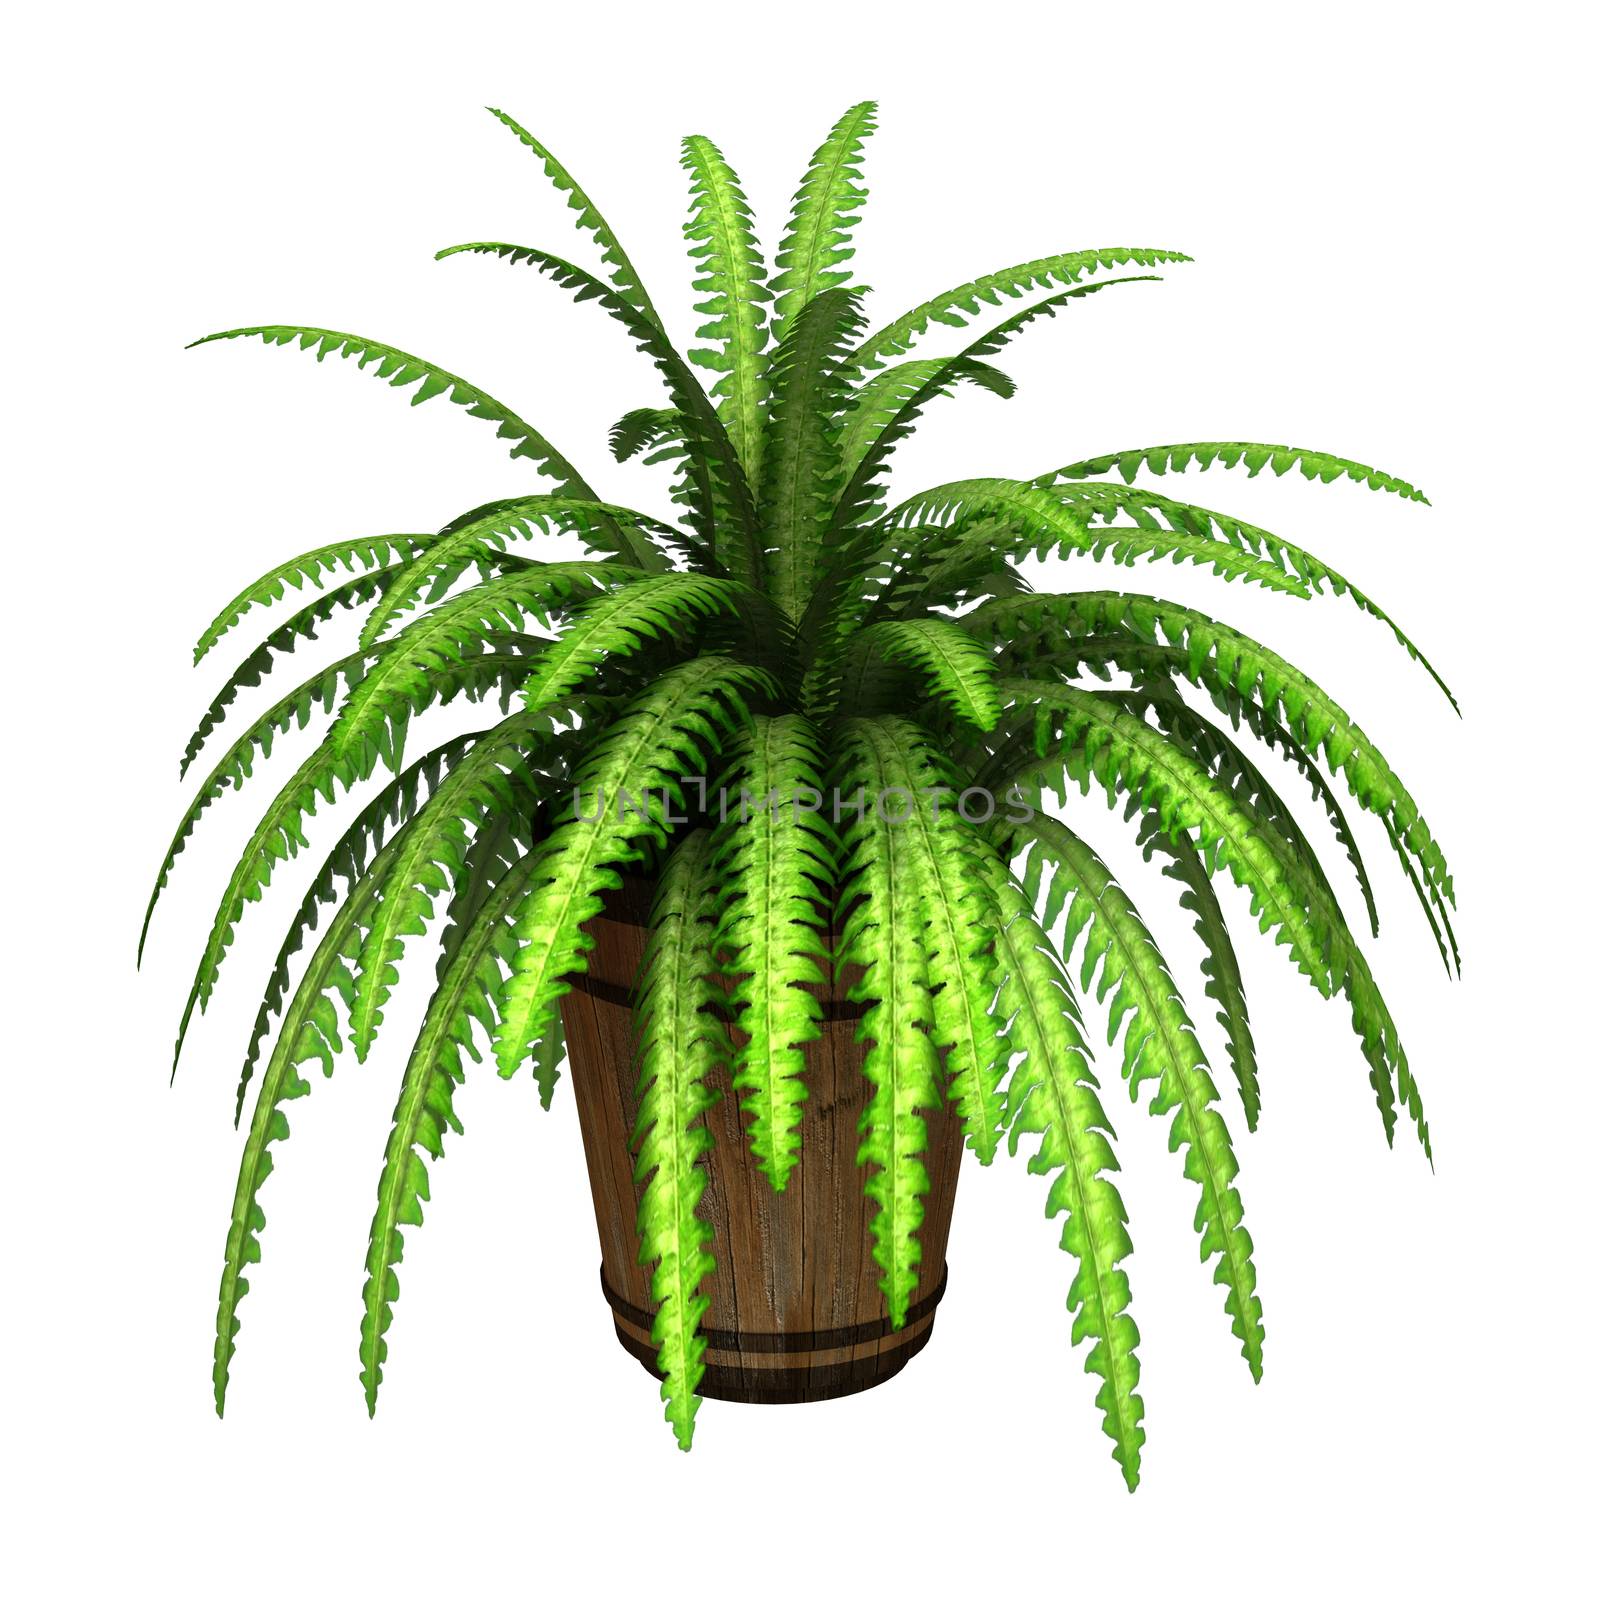 3D digital render of a green boston fern in a flower pot isolated on white background